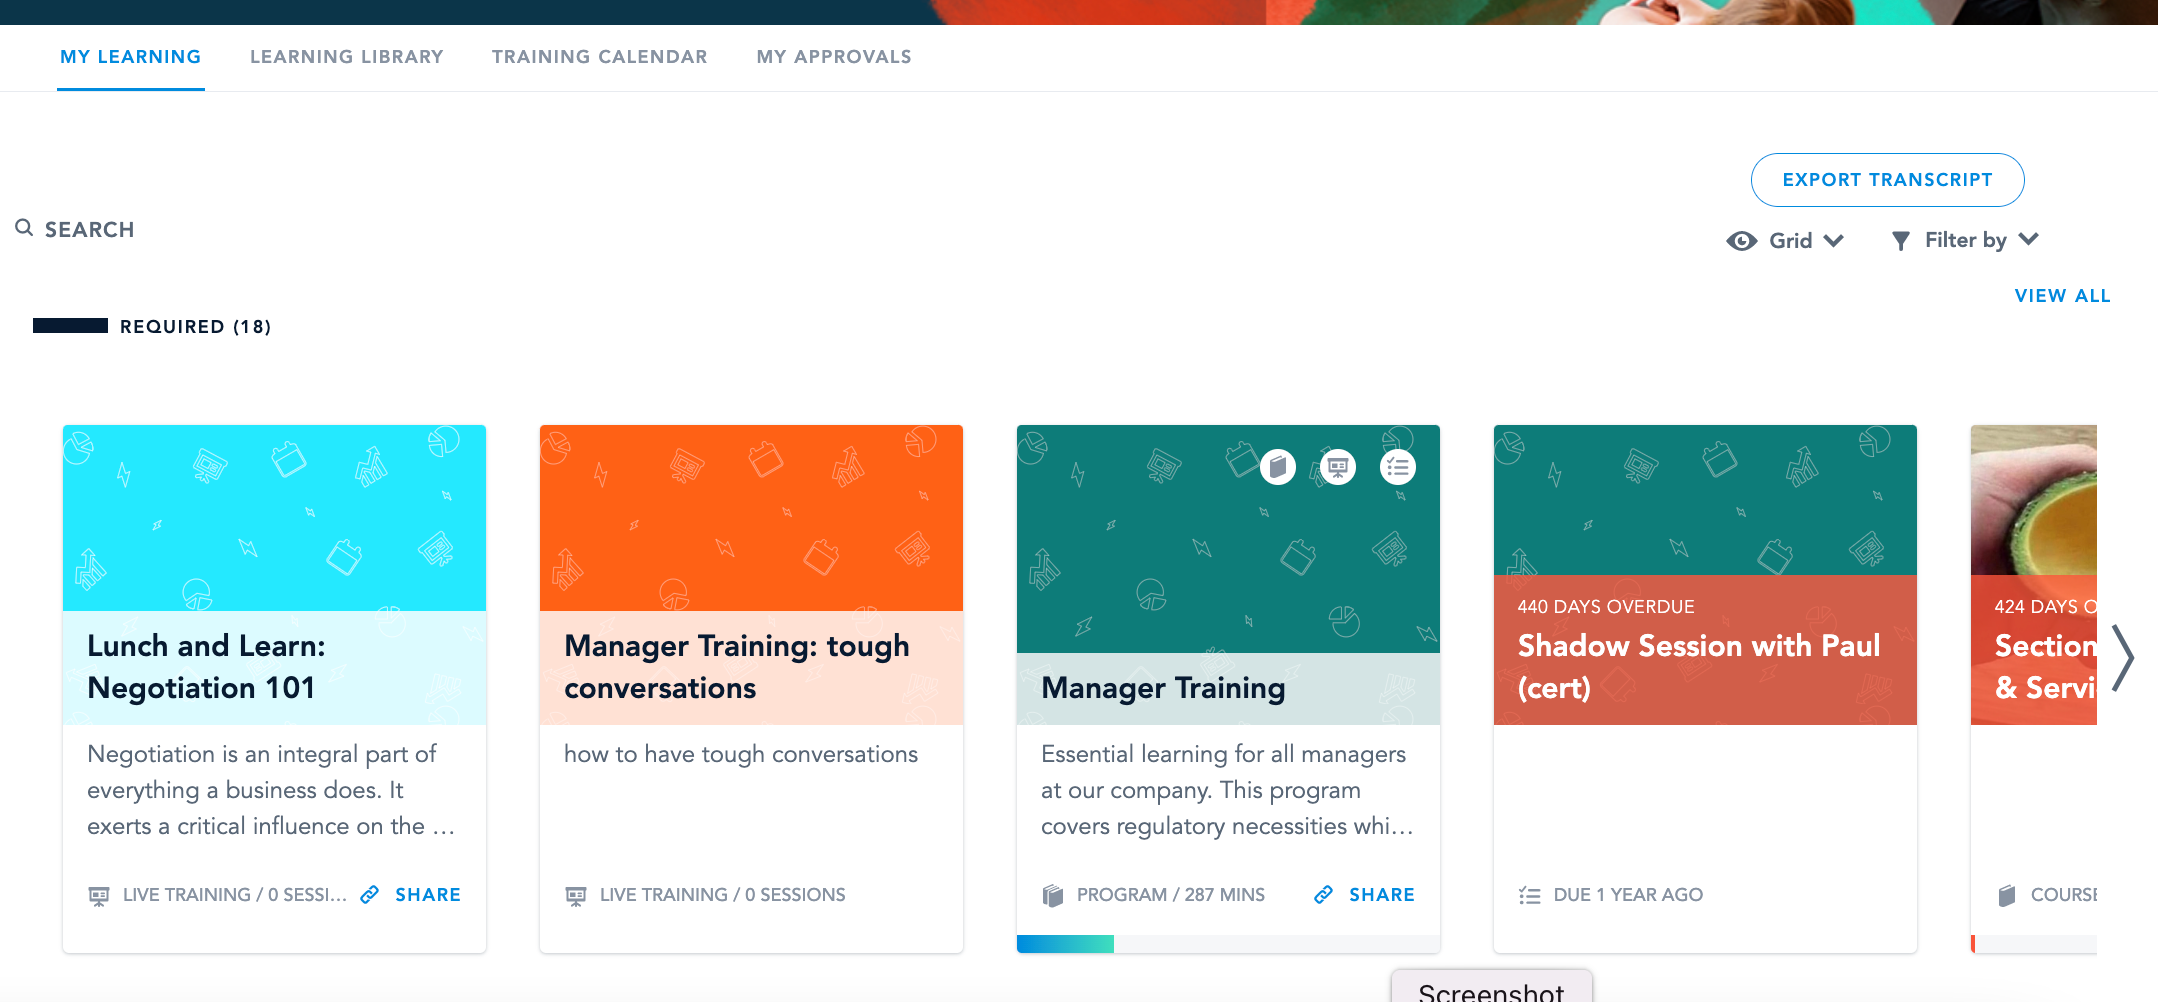 BRIDGE Software - Bridge's Learning Page: Incredibly intuitive interface makes it easy to find, engage with, and complete assigned and optional learning